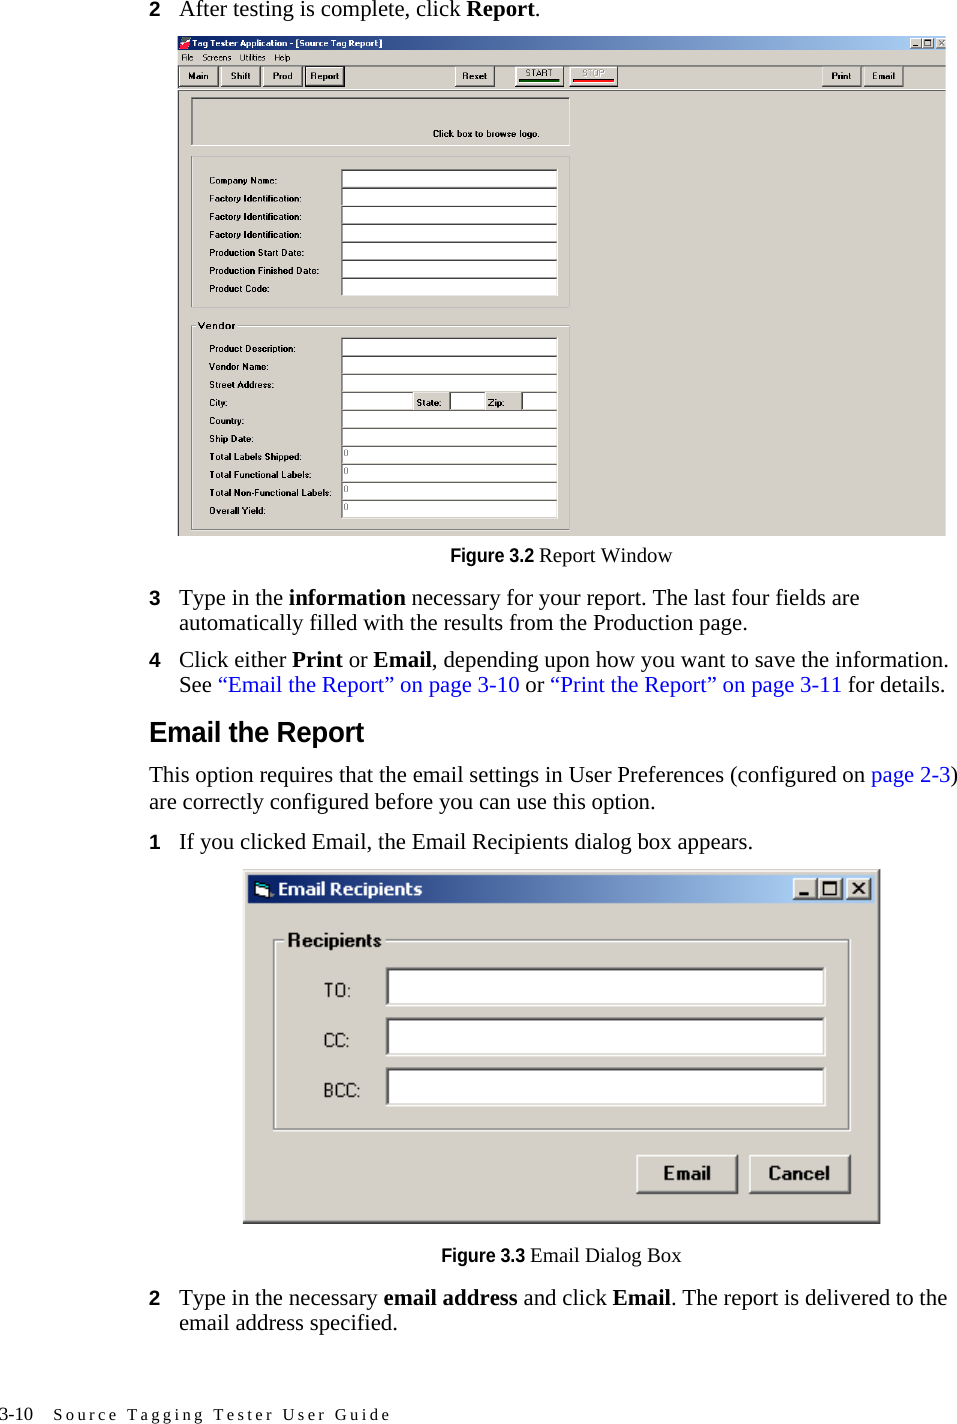 3-10 Source Tagging Tester User Guide2After testing is complete, click Report.Figure 3.2 Report Window3Type in the information necessary for your report. The last four fields are automatically filled with the results from the Production page.4Click either Print or Email, depending upon how you want to save the information. See “Email the Report” on page 3-10 or “Print the Report” on page 3-11 for details.Email the ReportThis option requires that the email settings in User Preferences (configured on page 2-3) are correctly configured before you can use this option.1If you clicked Email, the Email Recipients dialog box appears. Figure 3.3 Email Dialog Box2Type in the necessary email address and click Email. The report is delivered to the email address specified.